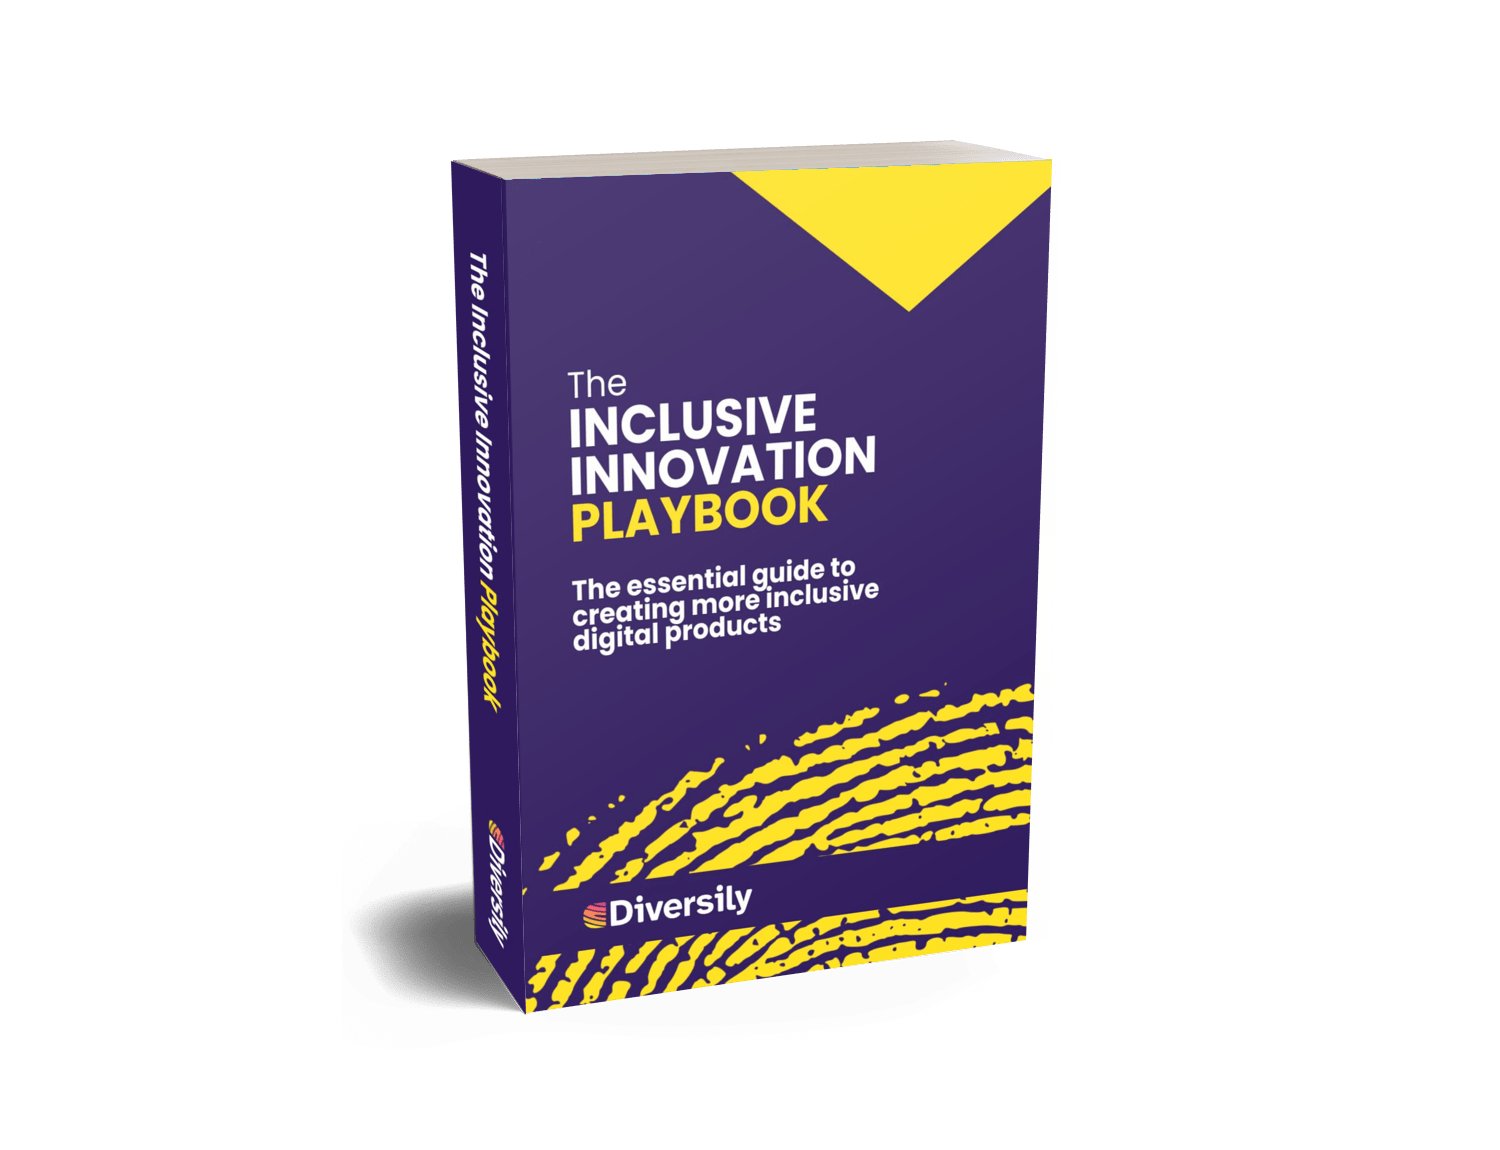 Image of book cover for the inclusive innovation playbook